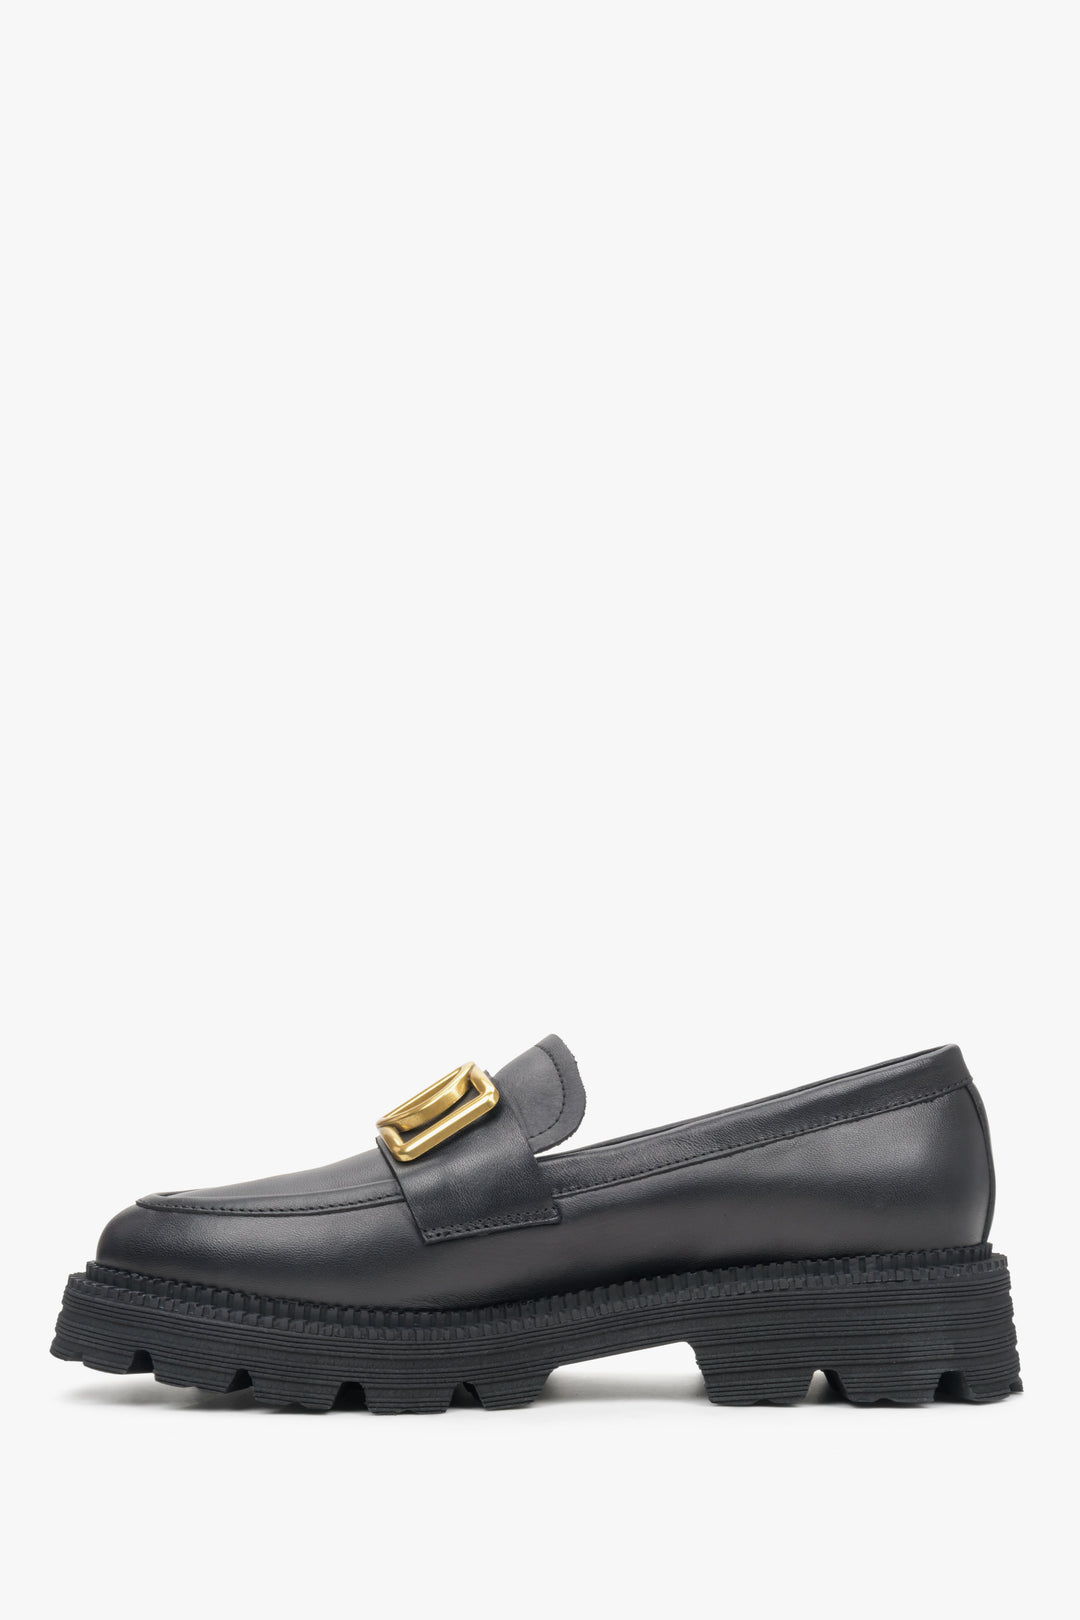 Women's black loafers made of natural Italian leather with gold chain by Estro.